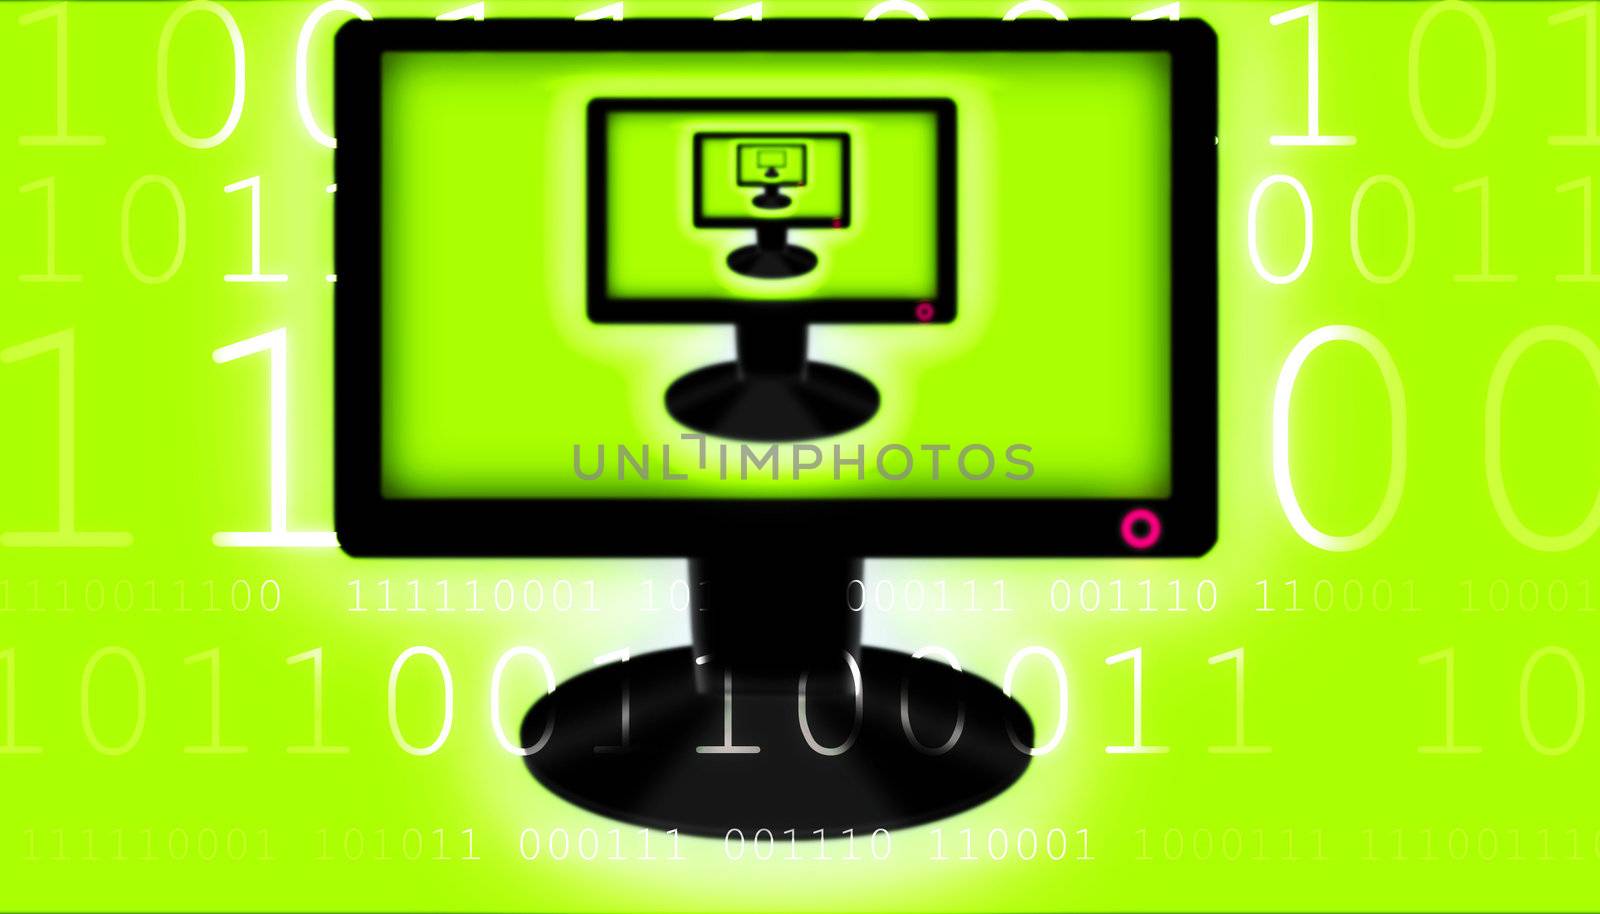 illustration of the monitor and binary code